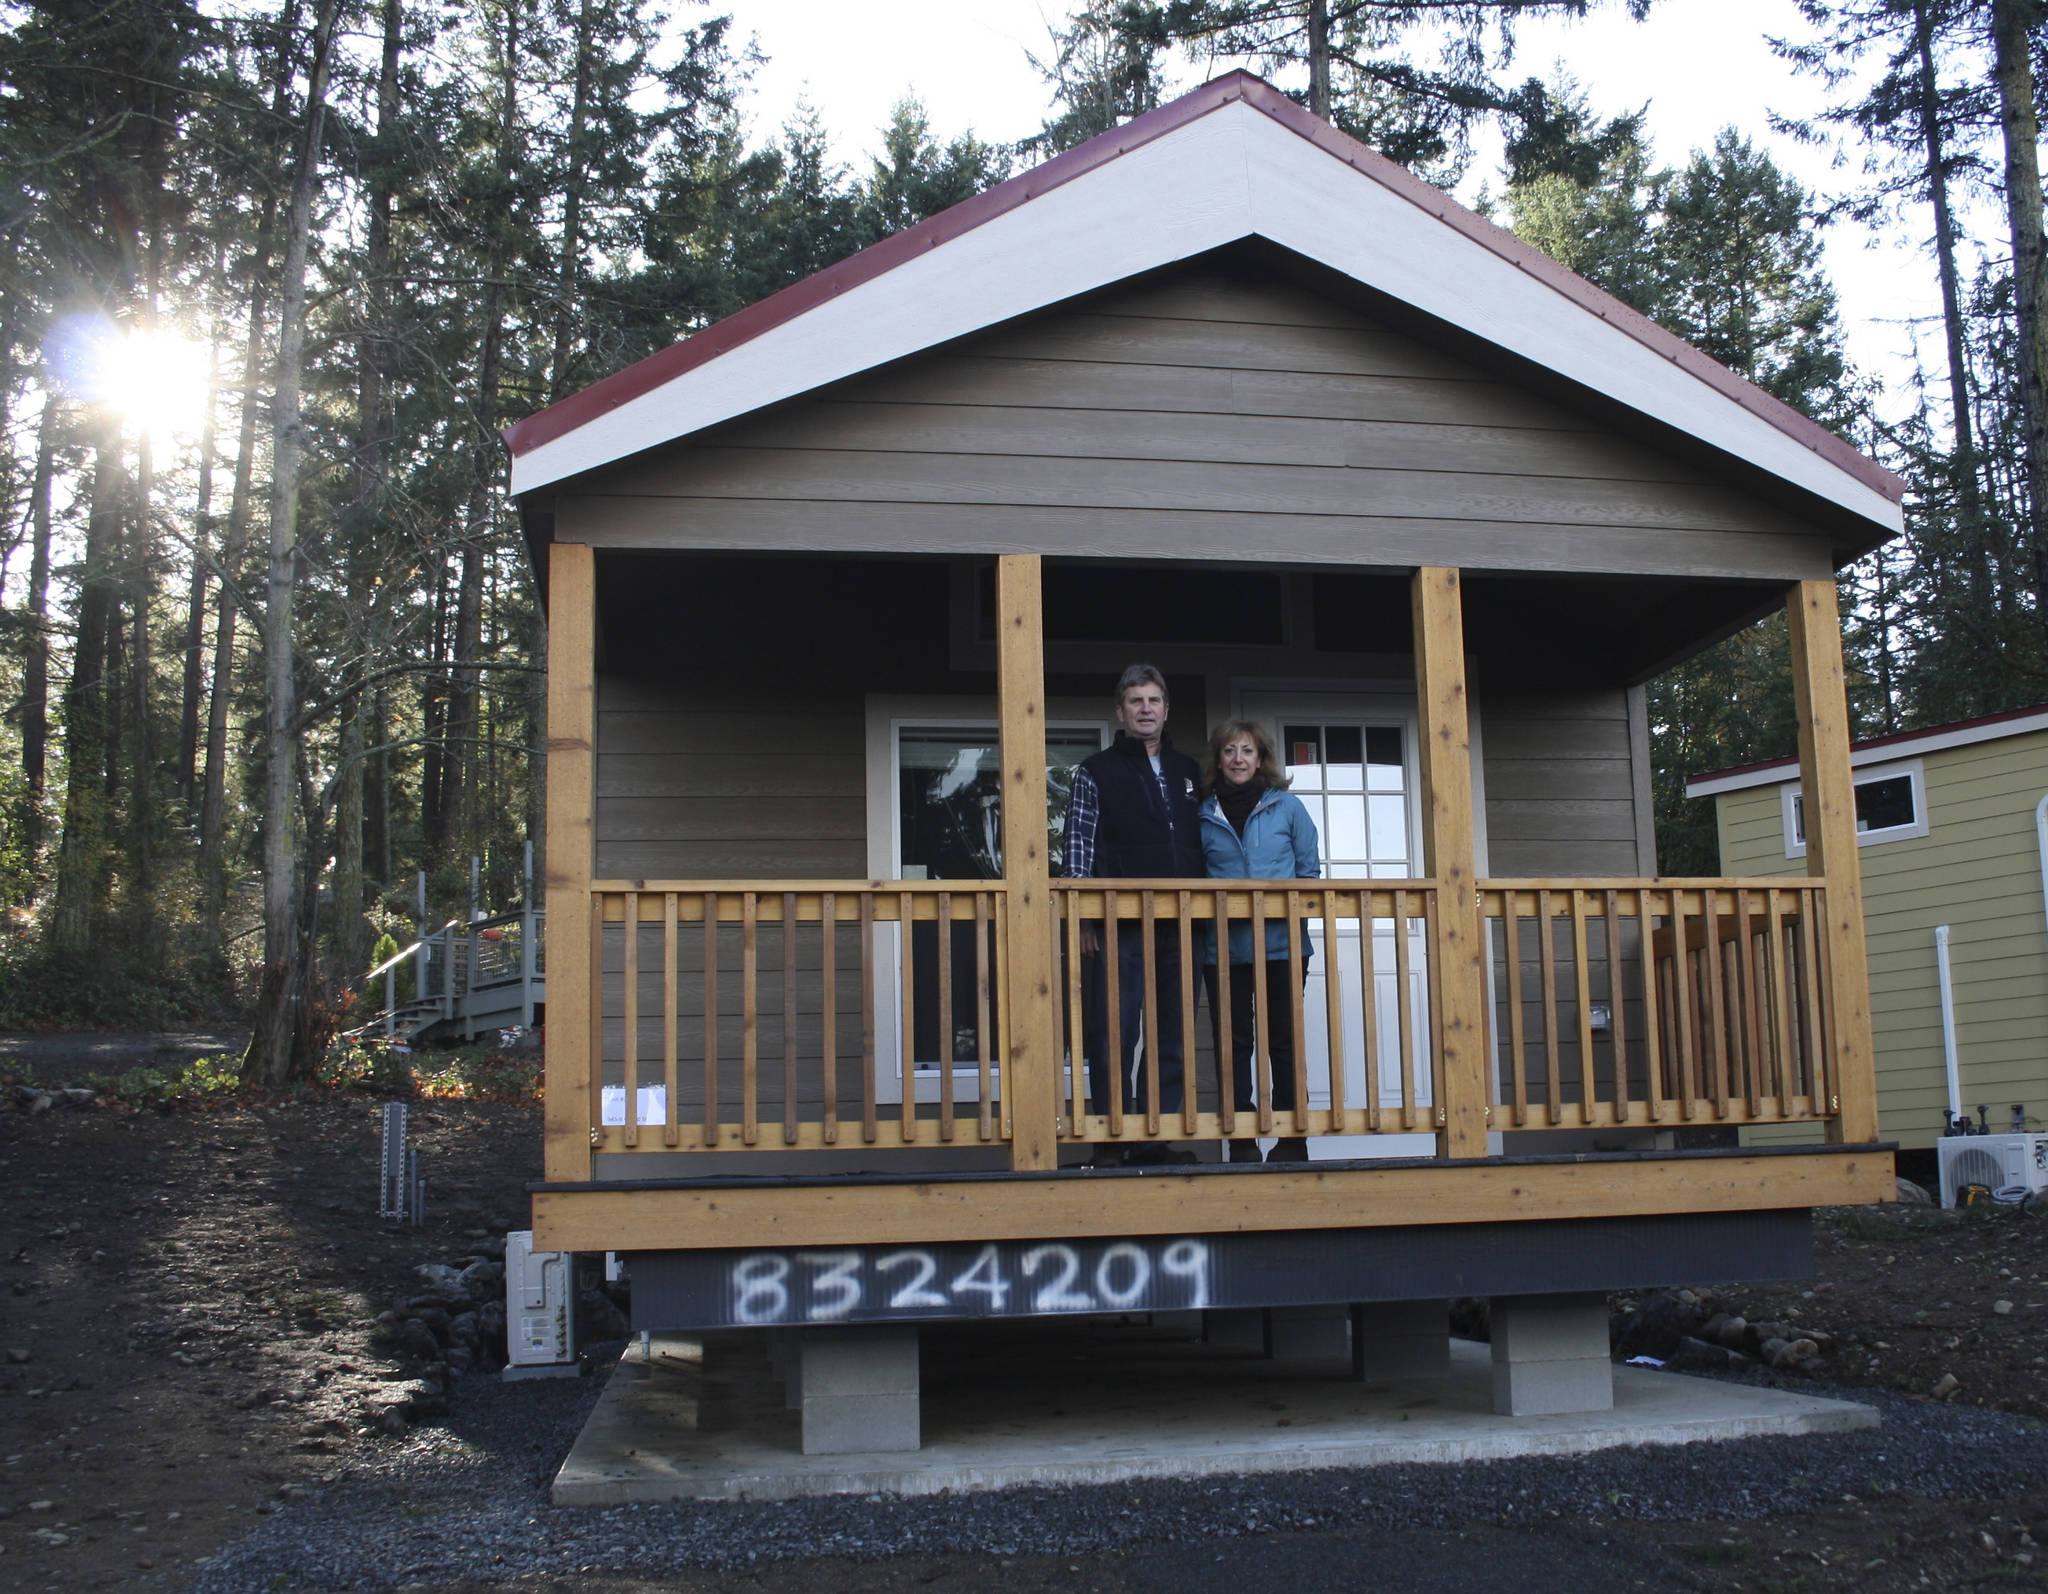 Staff photo/Hayley Day                                Anna Maria de Freitas and David Pass stand on the covered deck of a tiny house they will rent out in Friday Harbor. Each house comes with a 90-square-foot covered deck in the front.